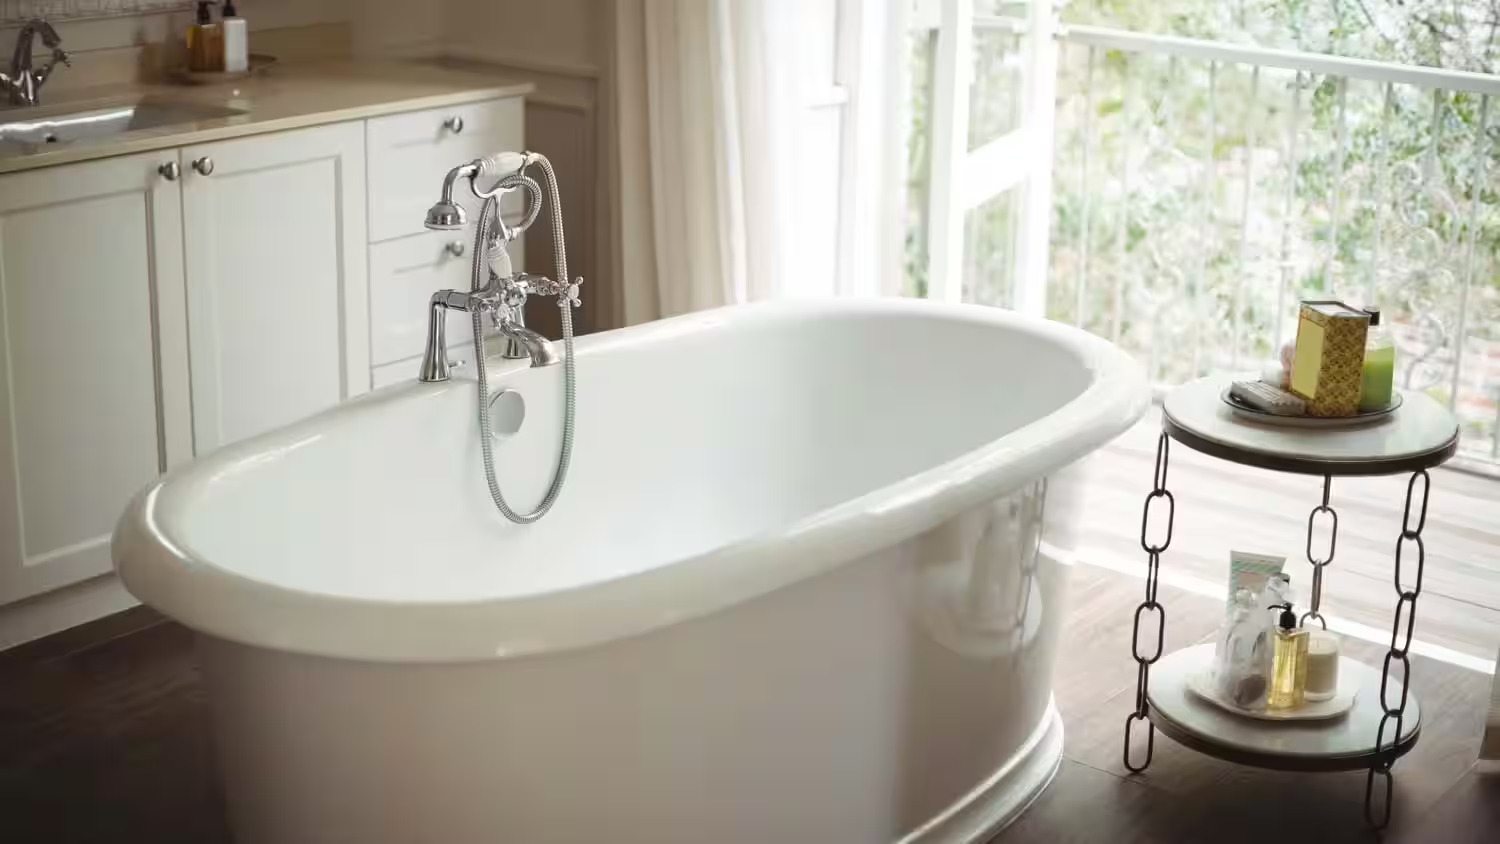 What Material Bathtub Is Best?